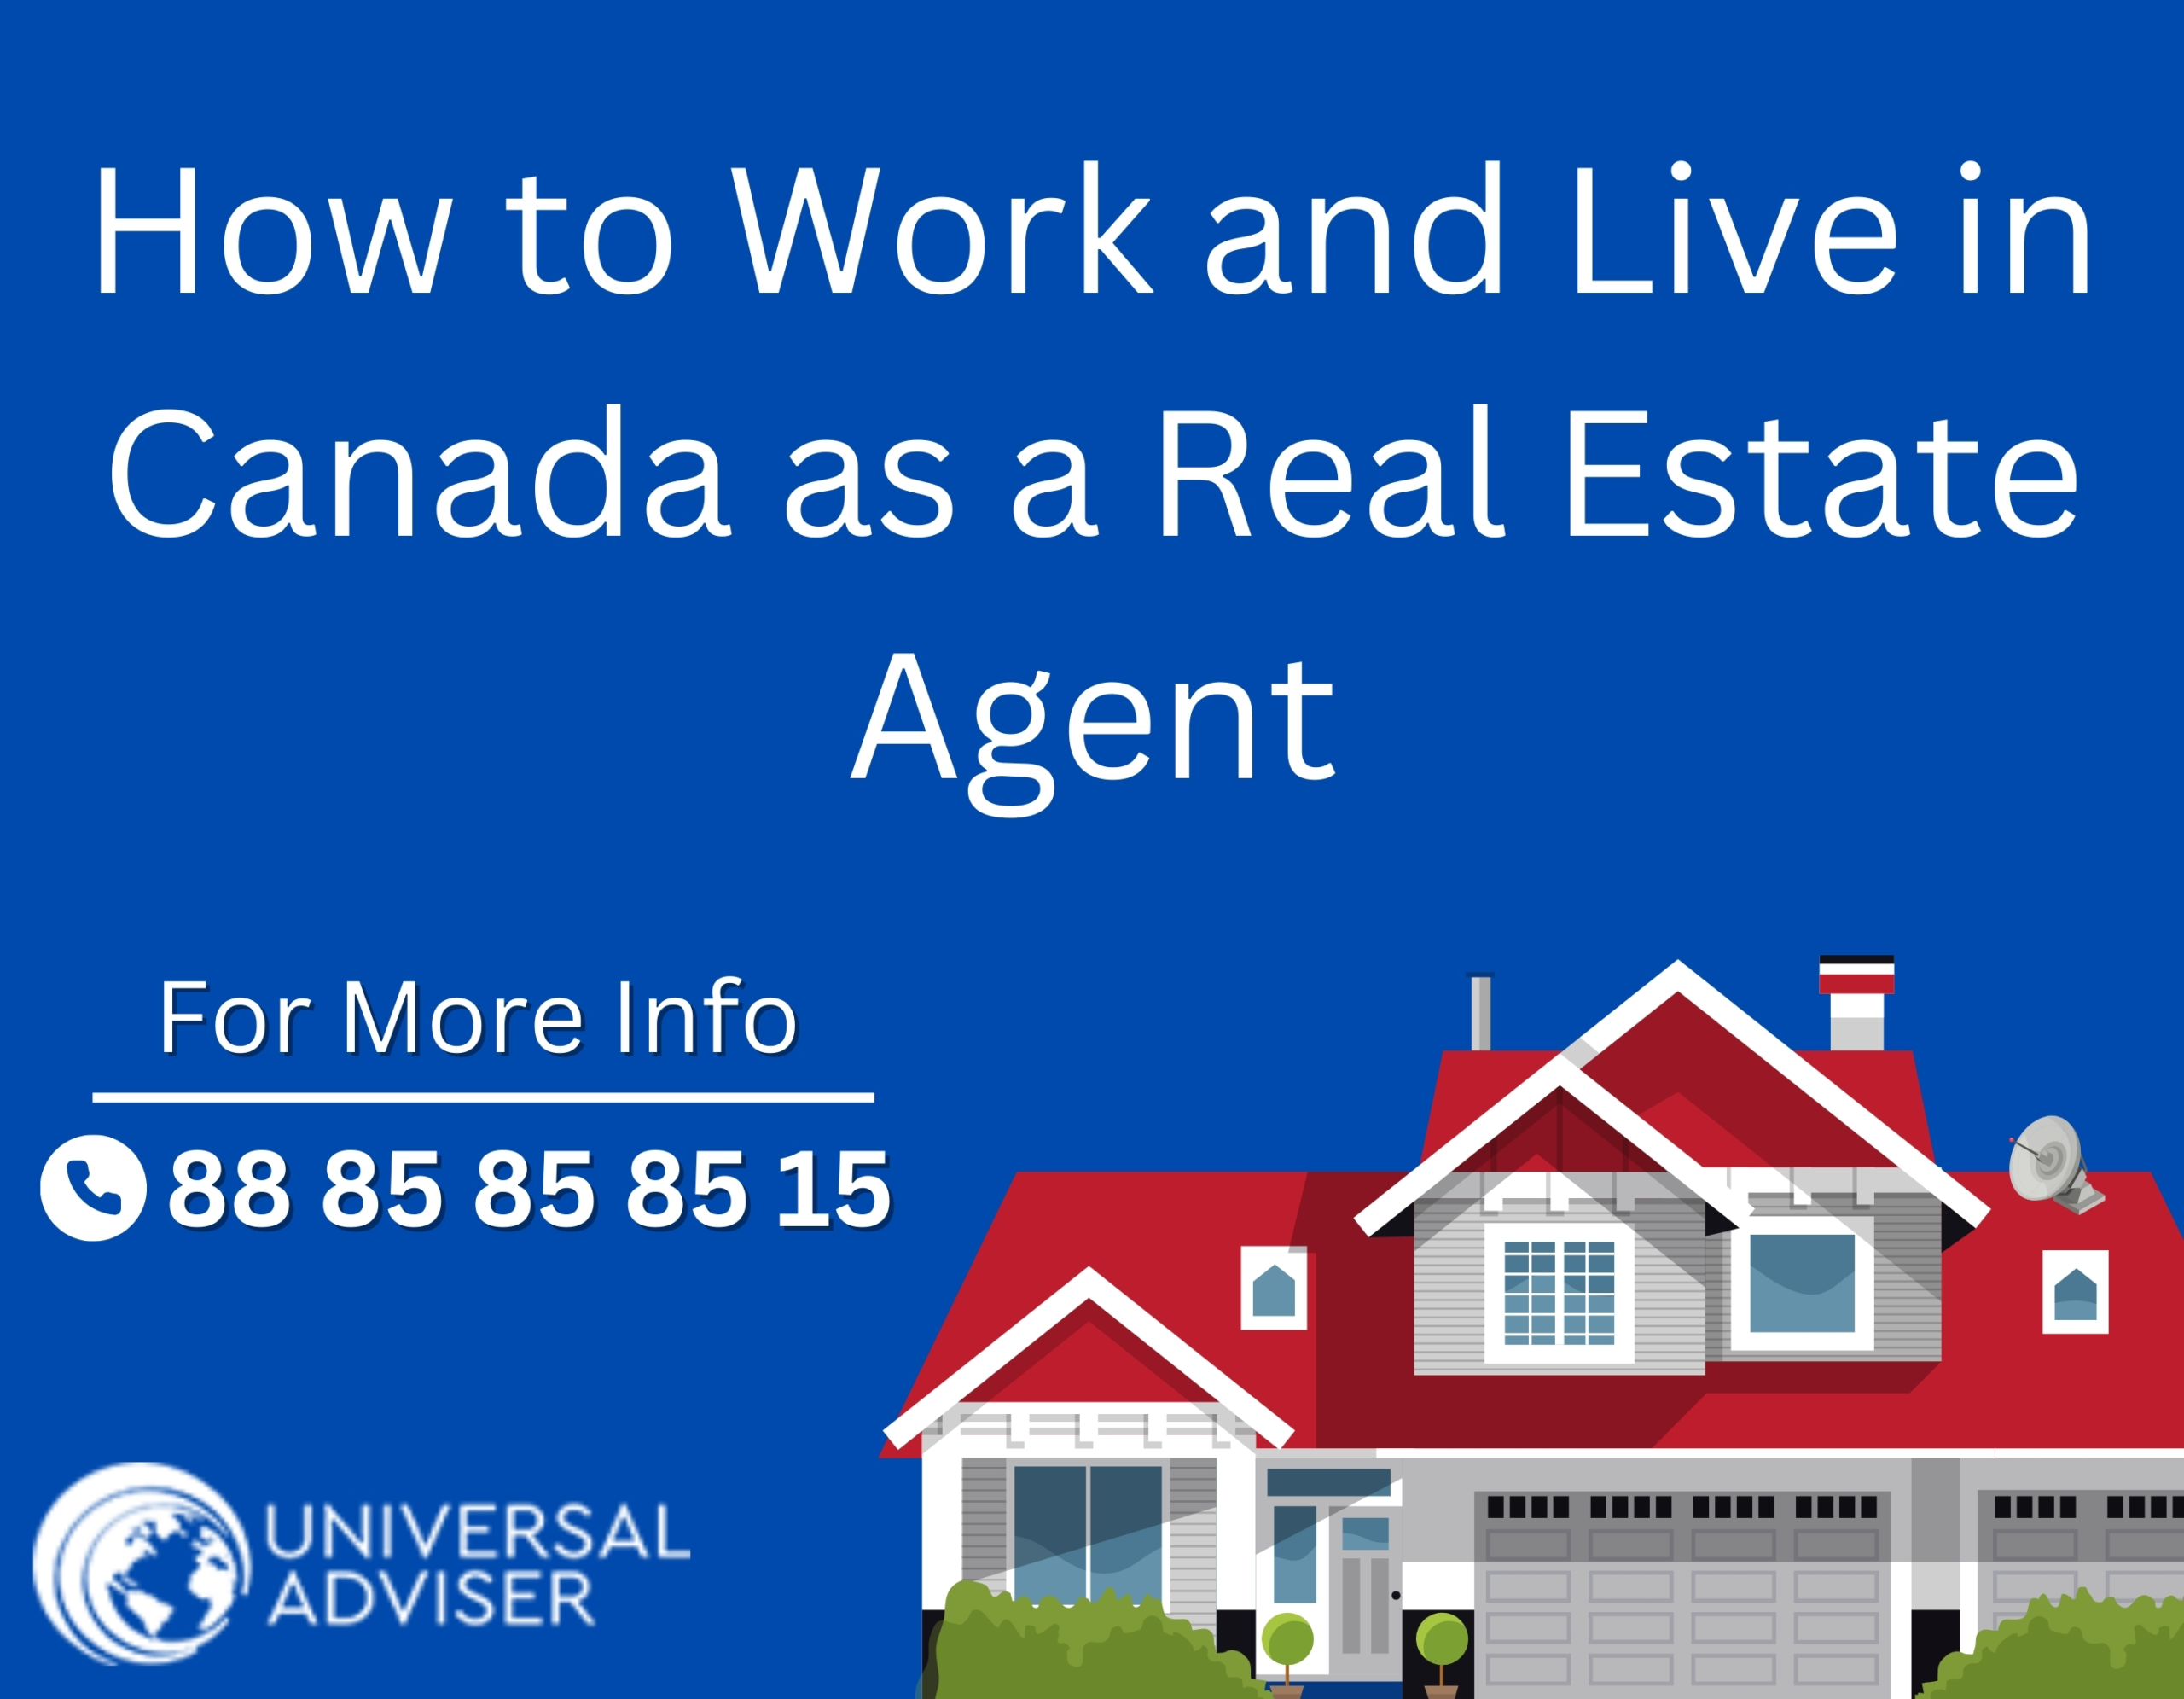 How to Work and Live in Canada as a Real Estate Agent